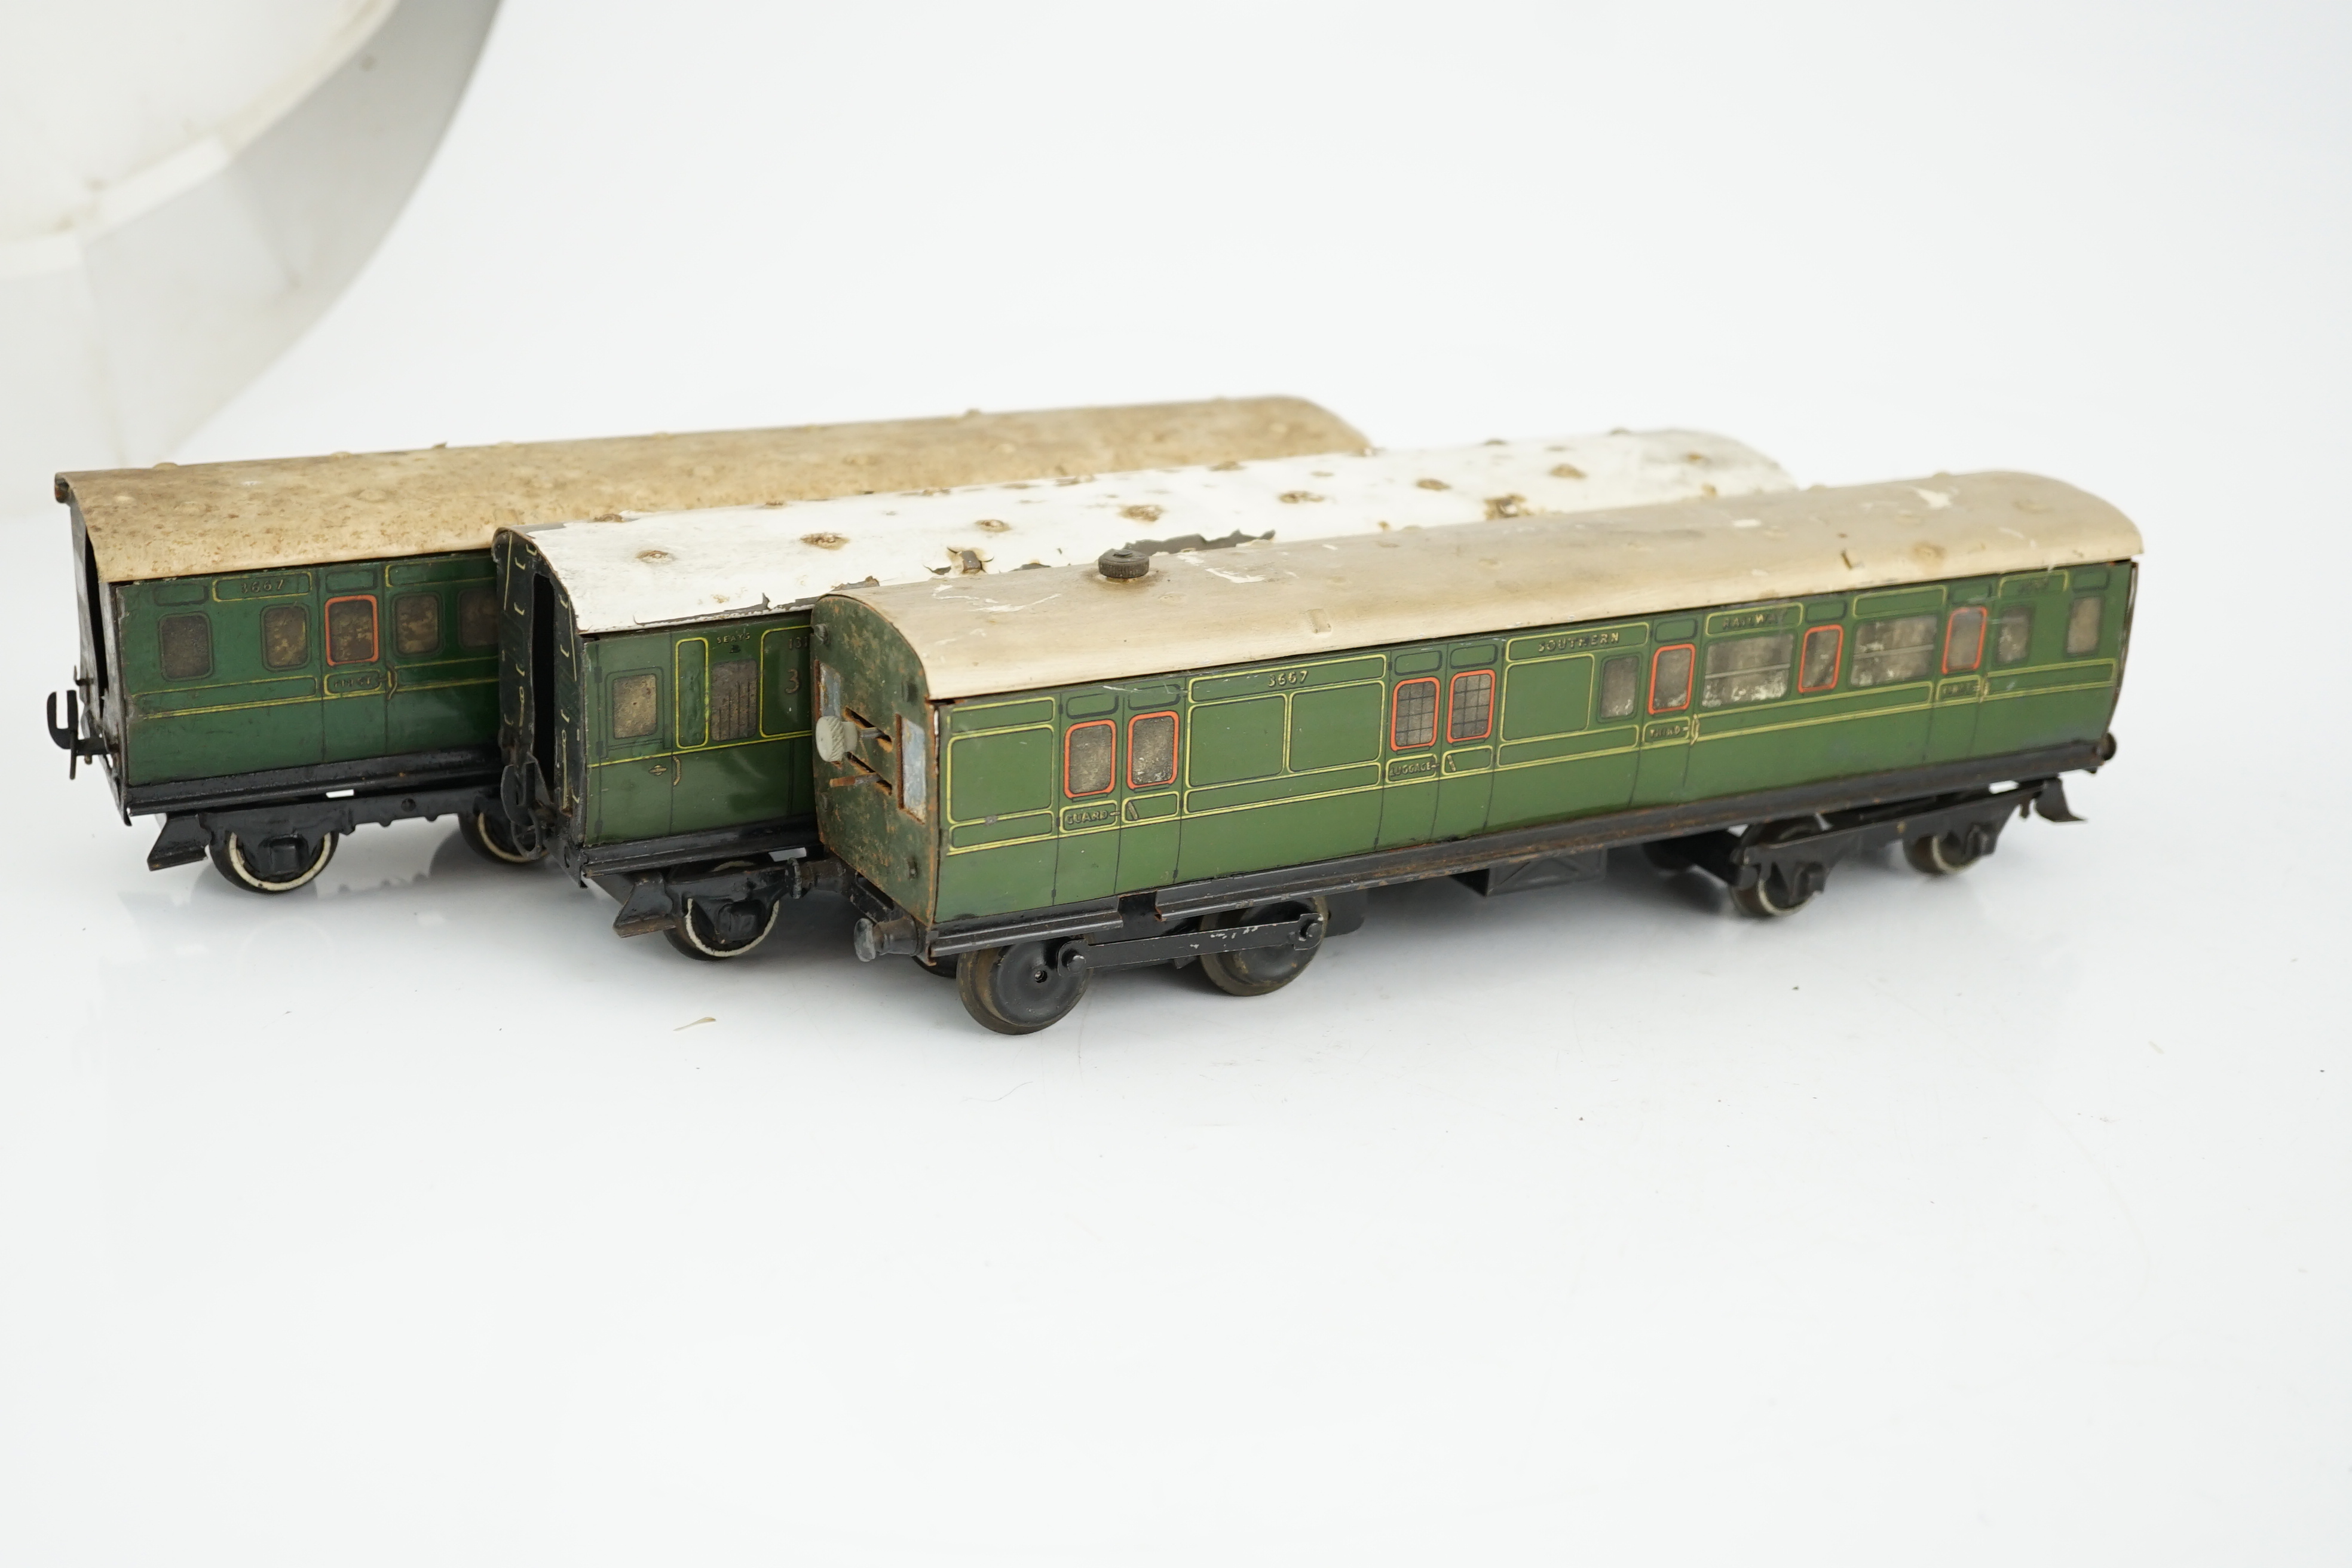 Six Hornby 0 gauge tinplate No.2 coaches in Southern Railway livery, one coach adapted to a - Image 6 of 12